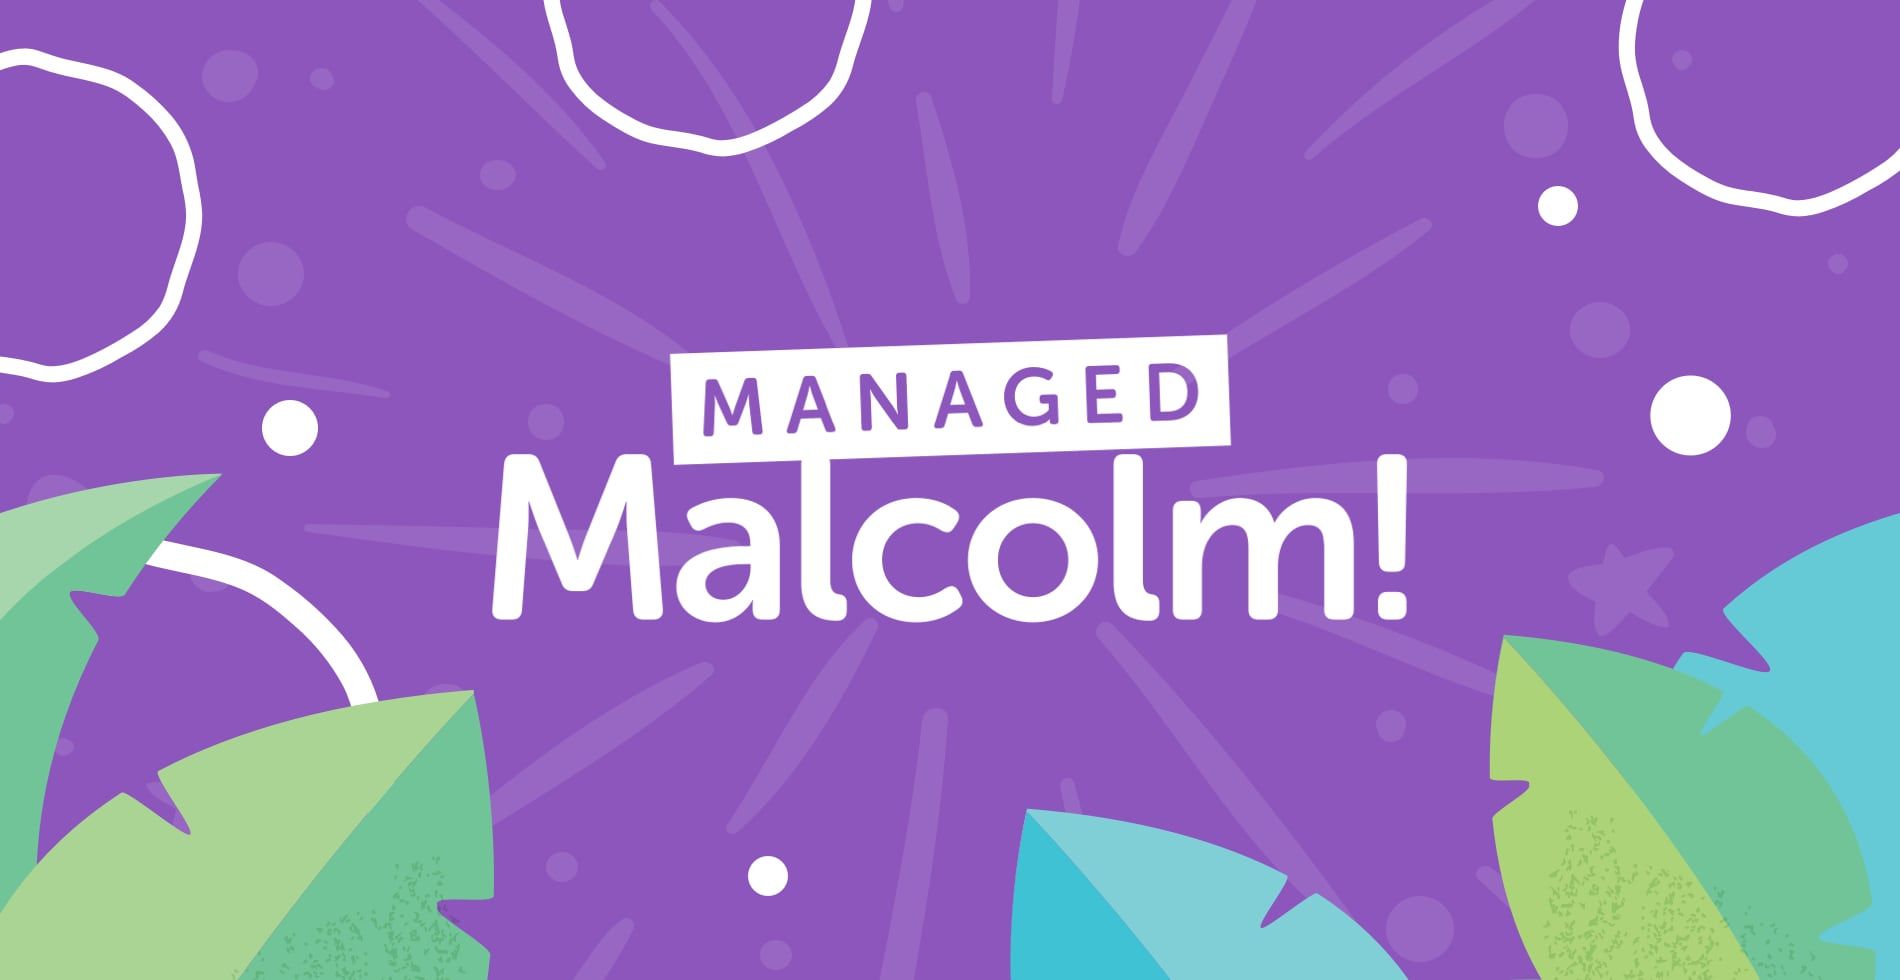 Introducing Managed Malcolm!